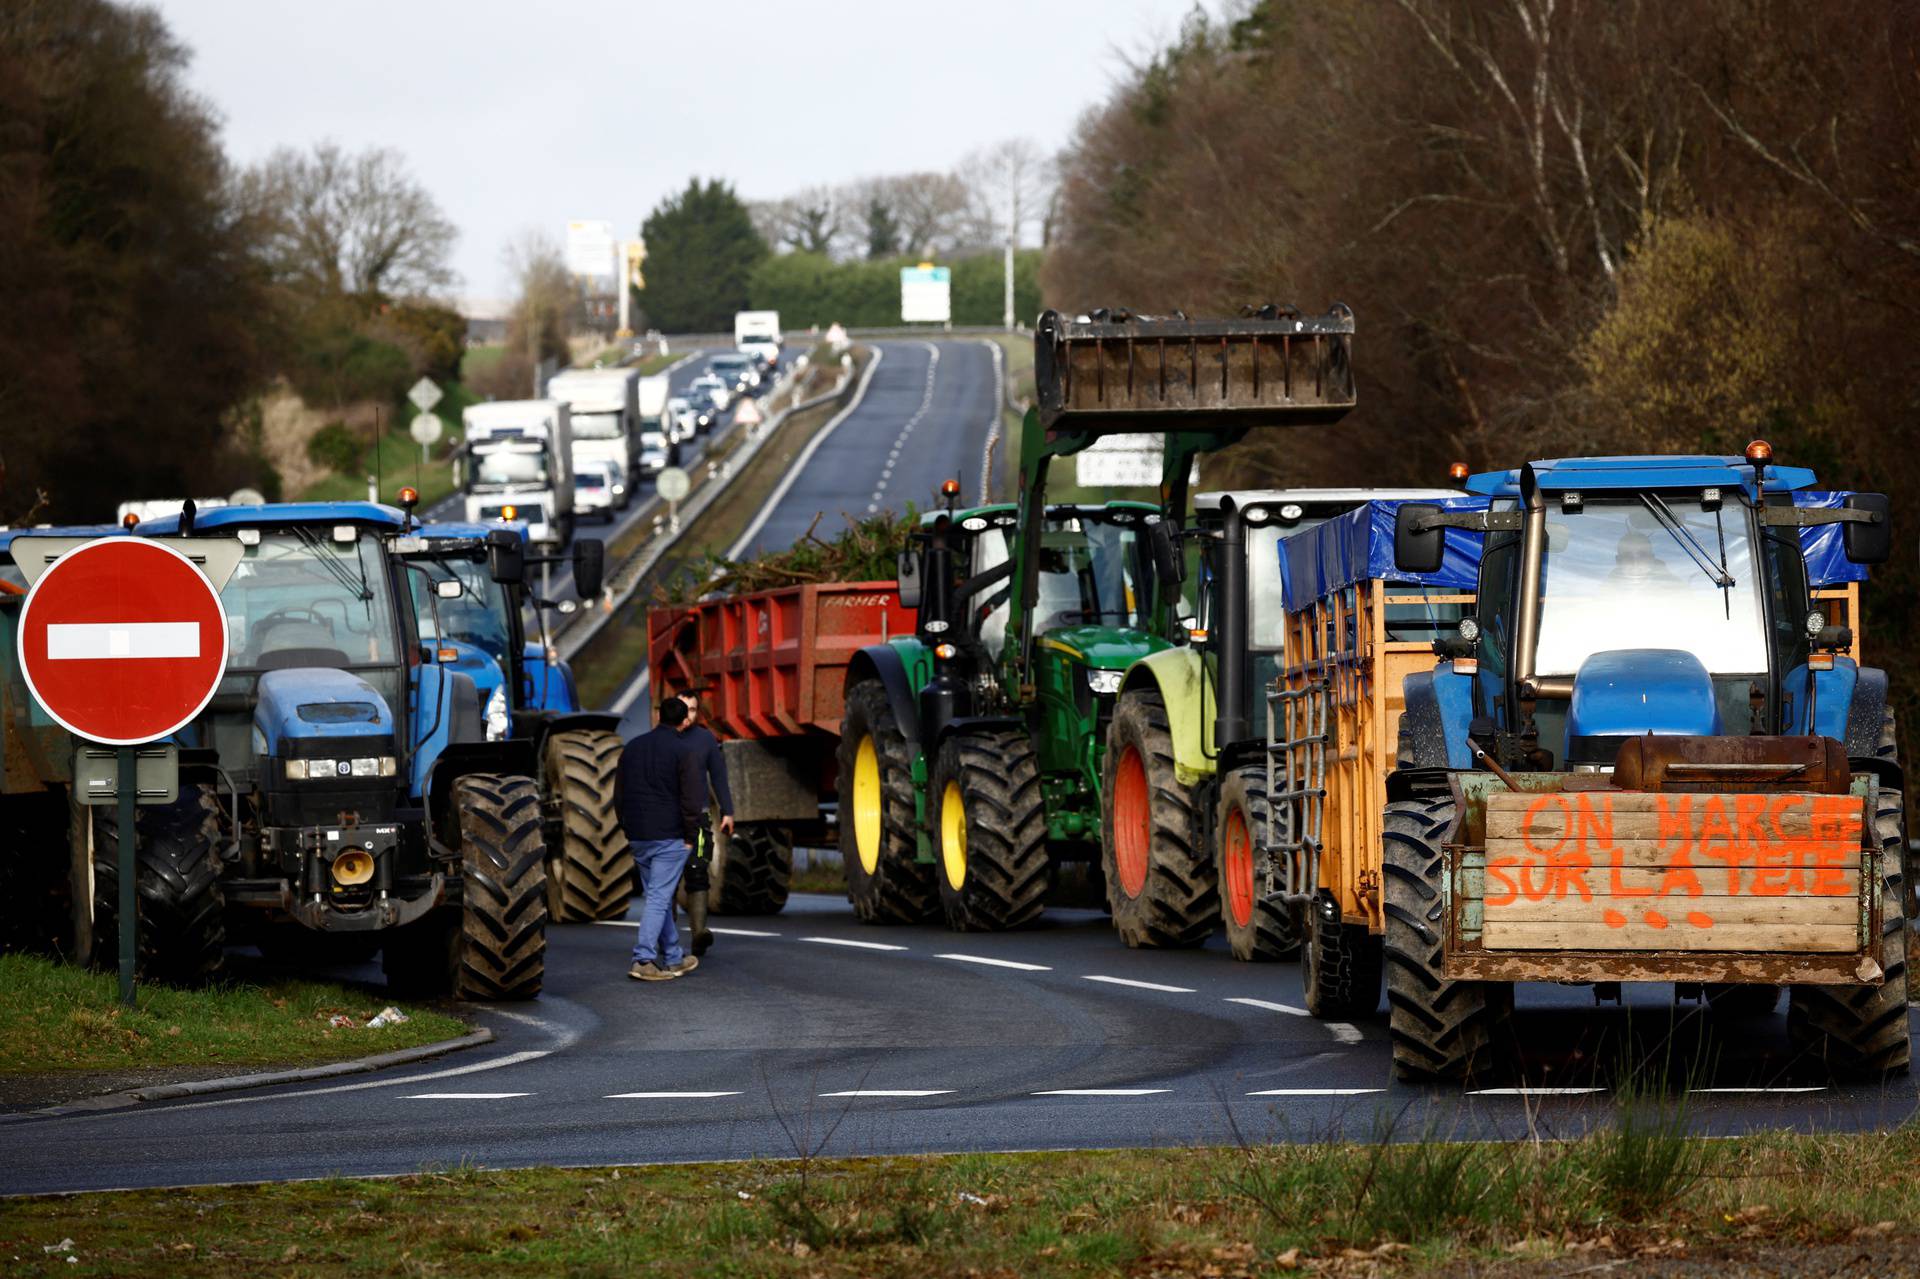 Nationwide farmer protests continue in France